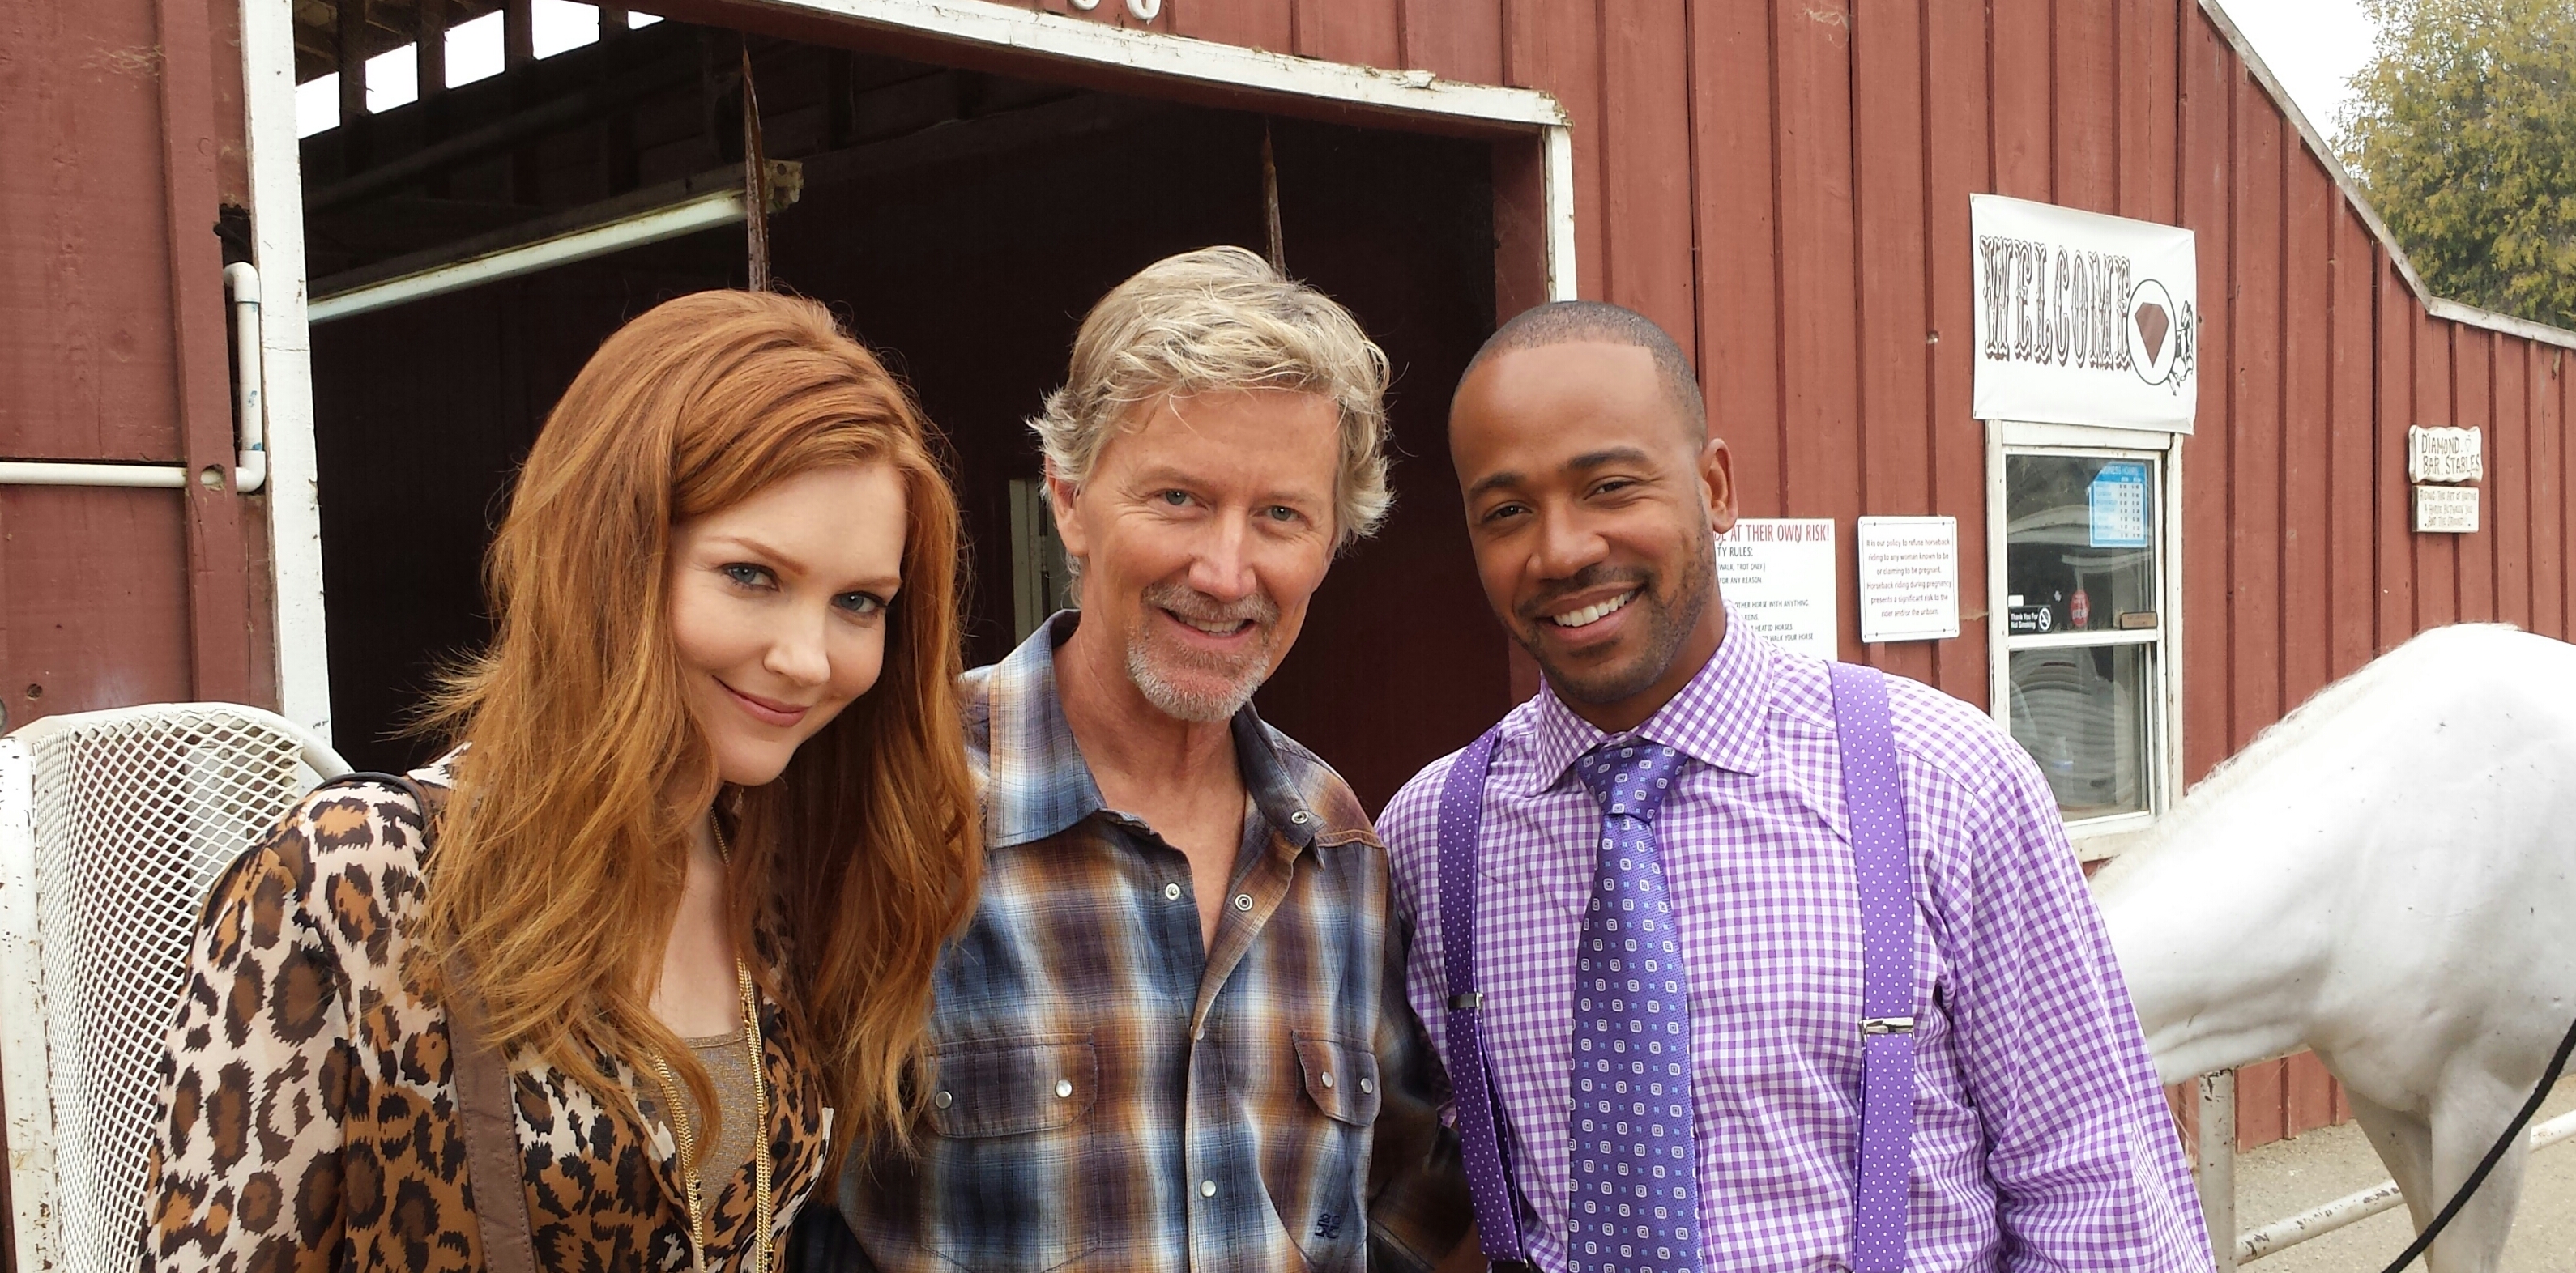 Randy with Darby Stanchfield & Columbus Short on set of Scandal